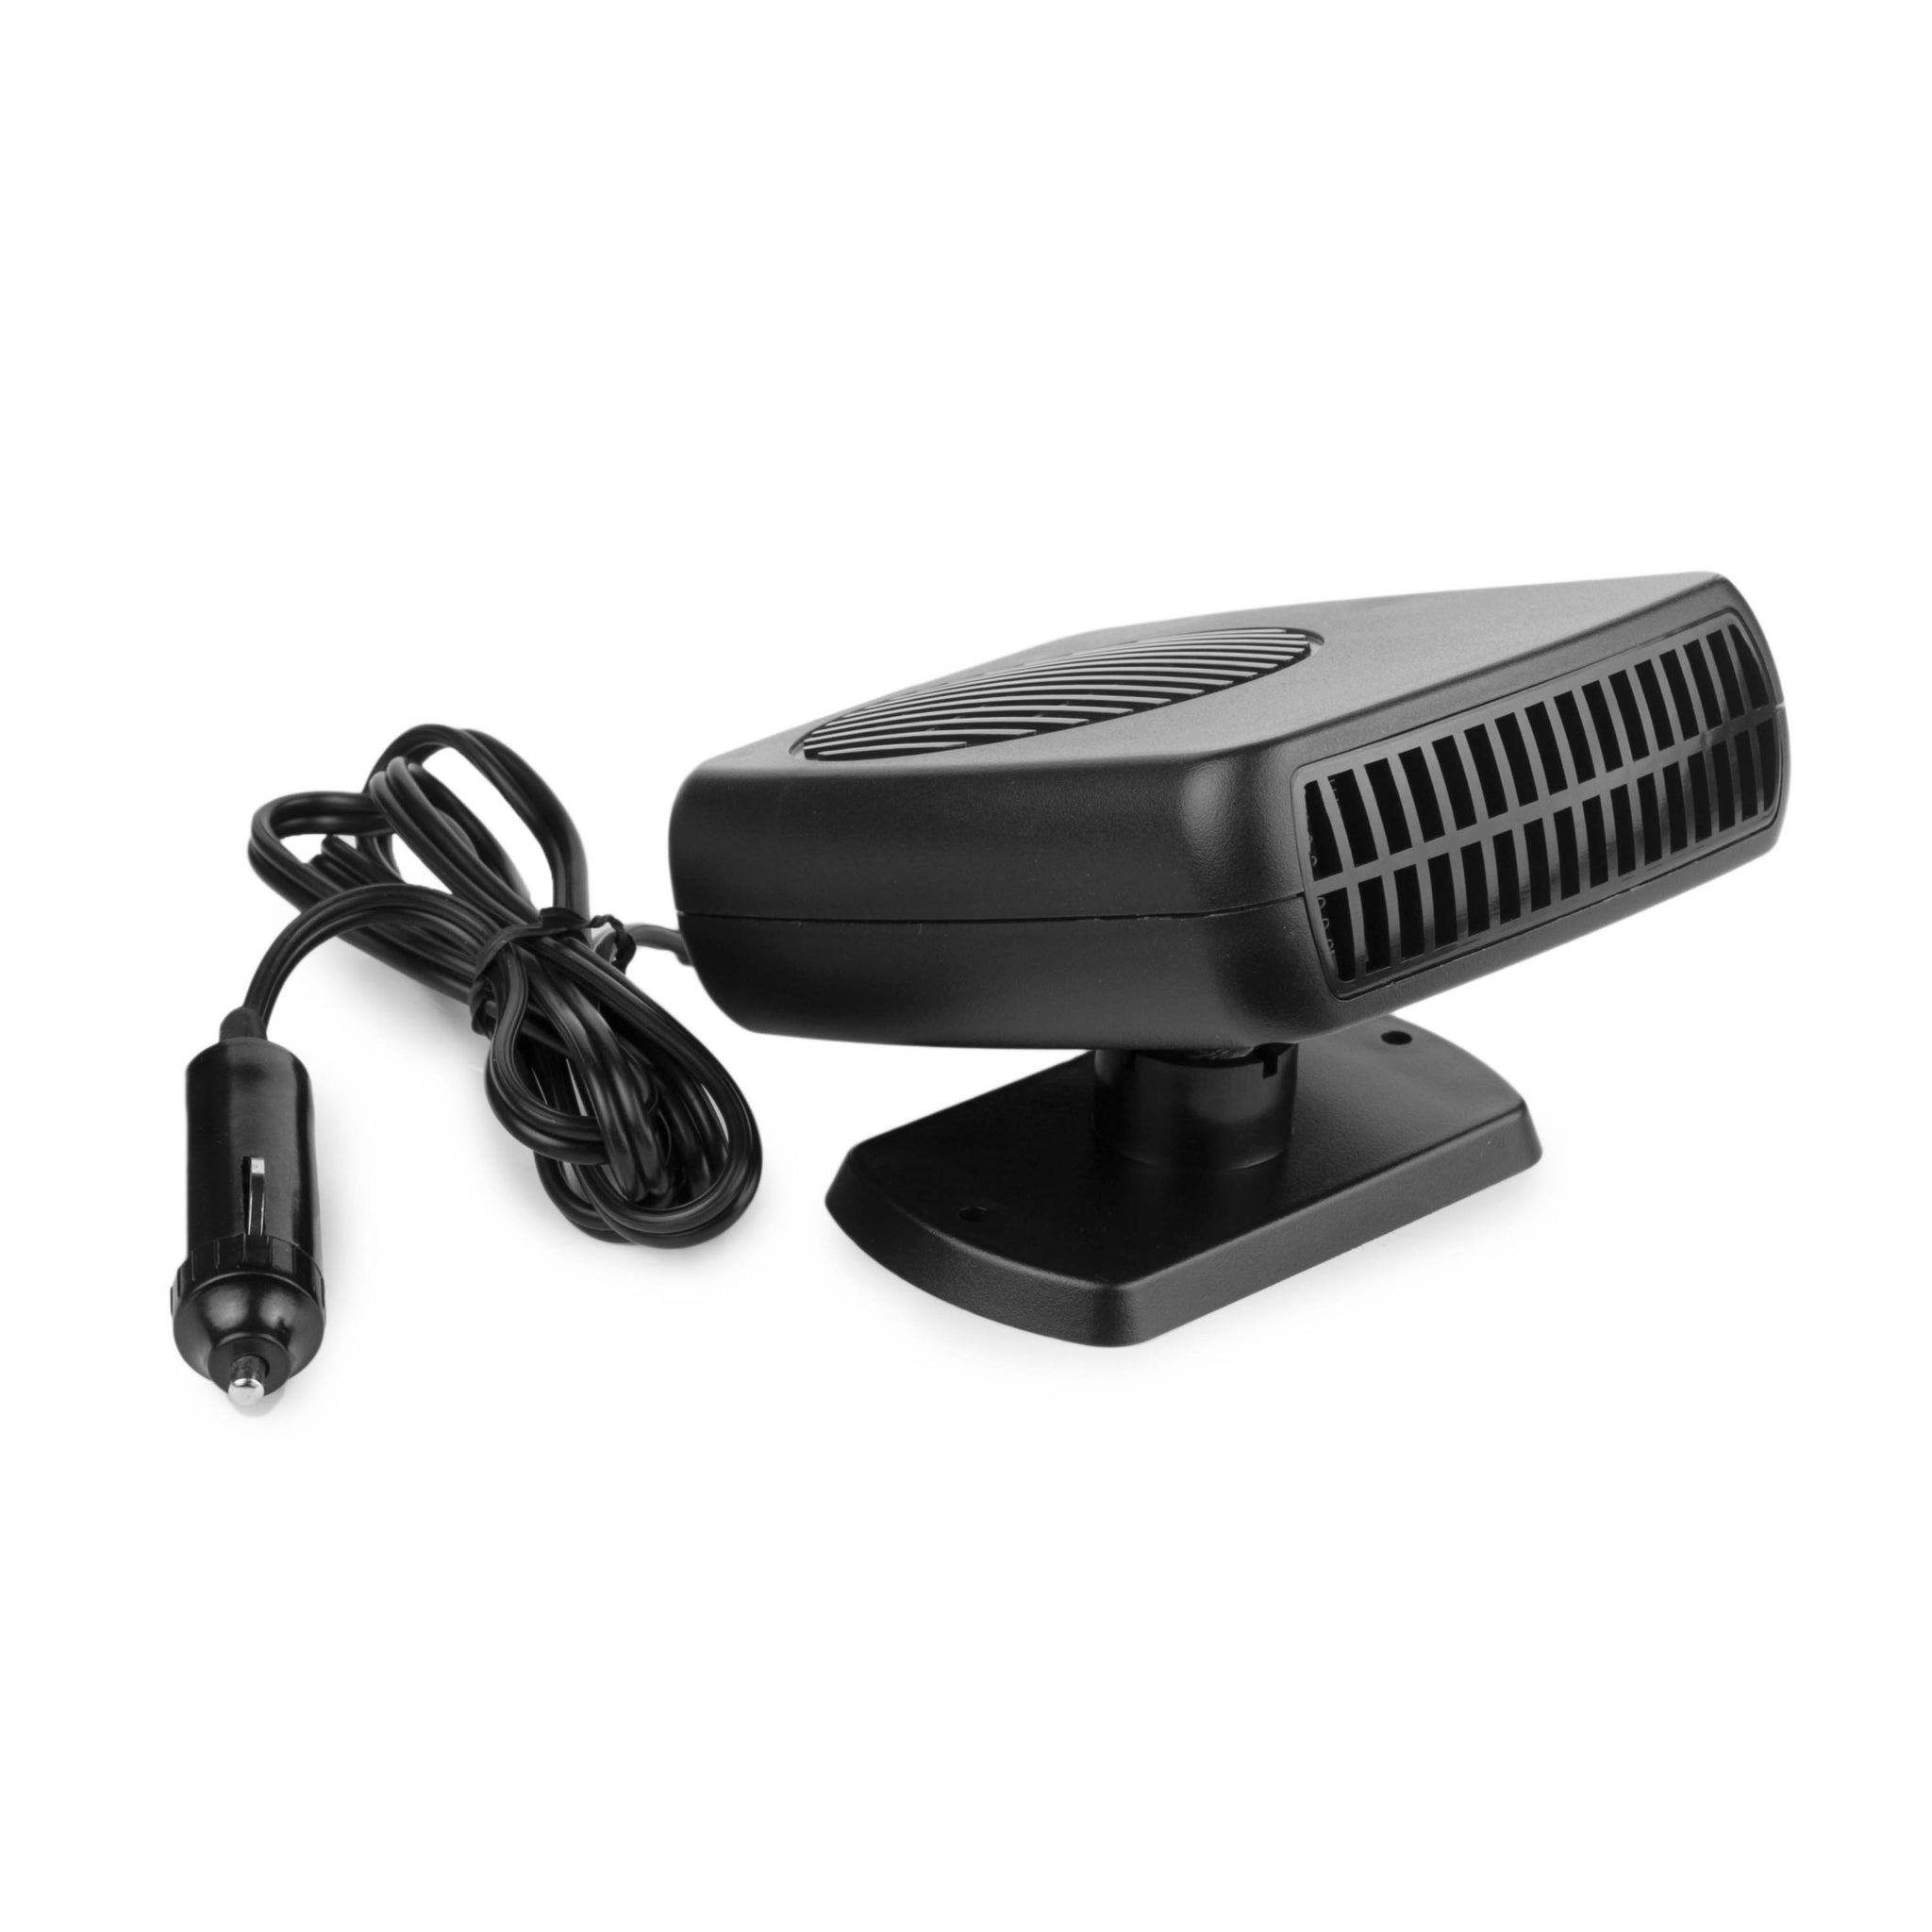 Defroster For Car Windshield 12/24V Windshield Defogger And Defroster 150W  Portable Heater With Air Purification Fast Heating